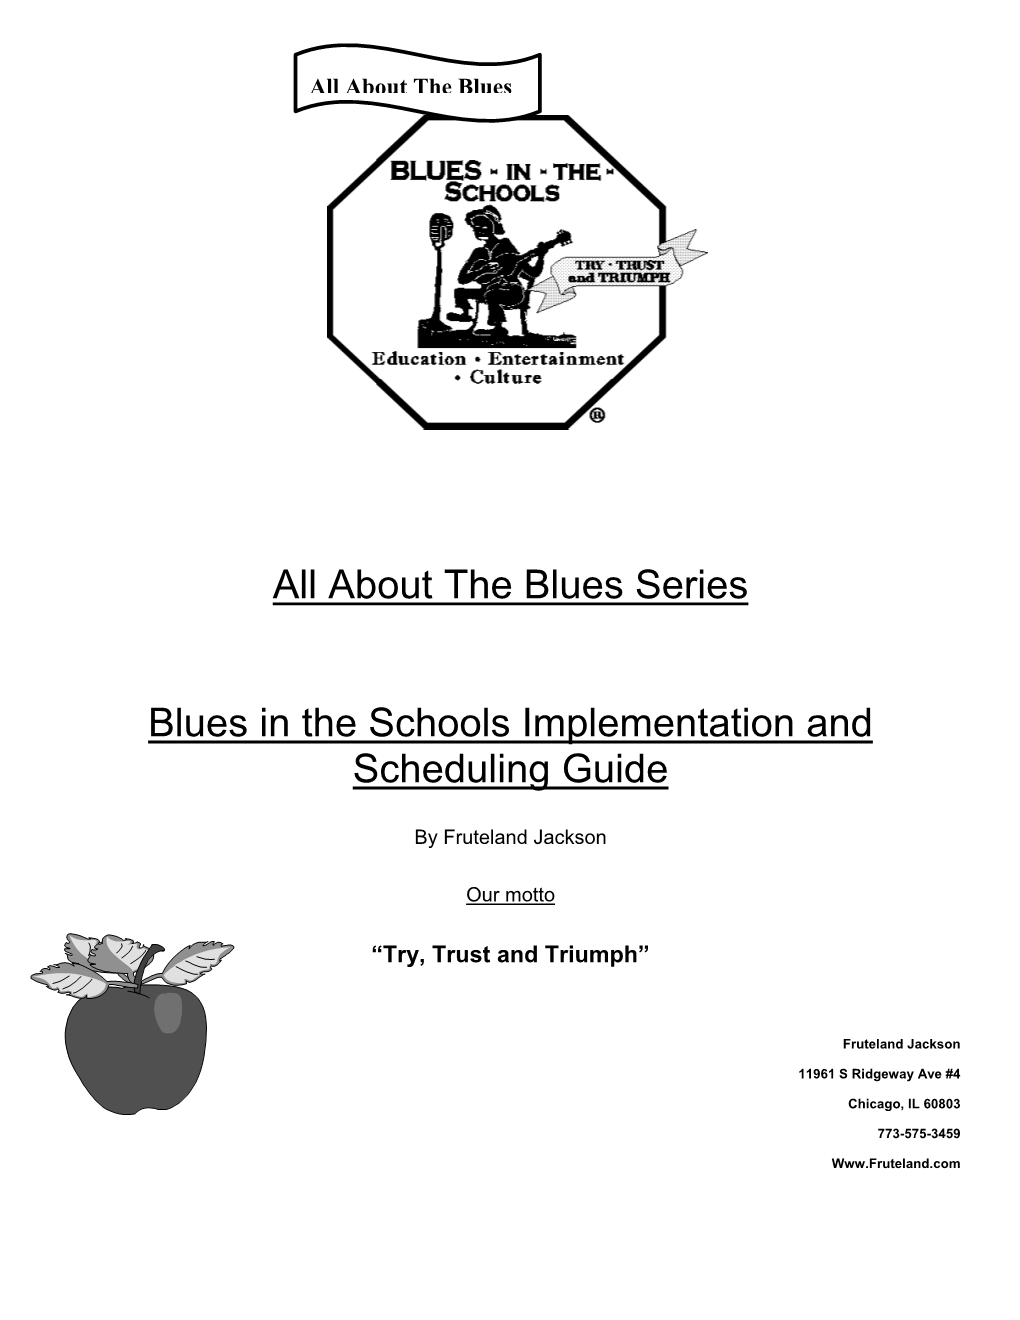 All About the Blues Series Blues in the Schools Implementation And